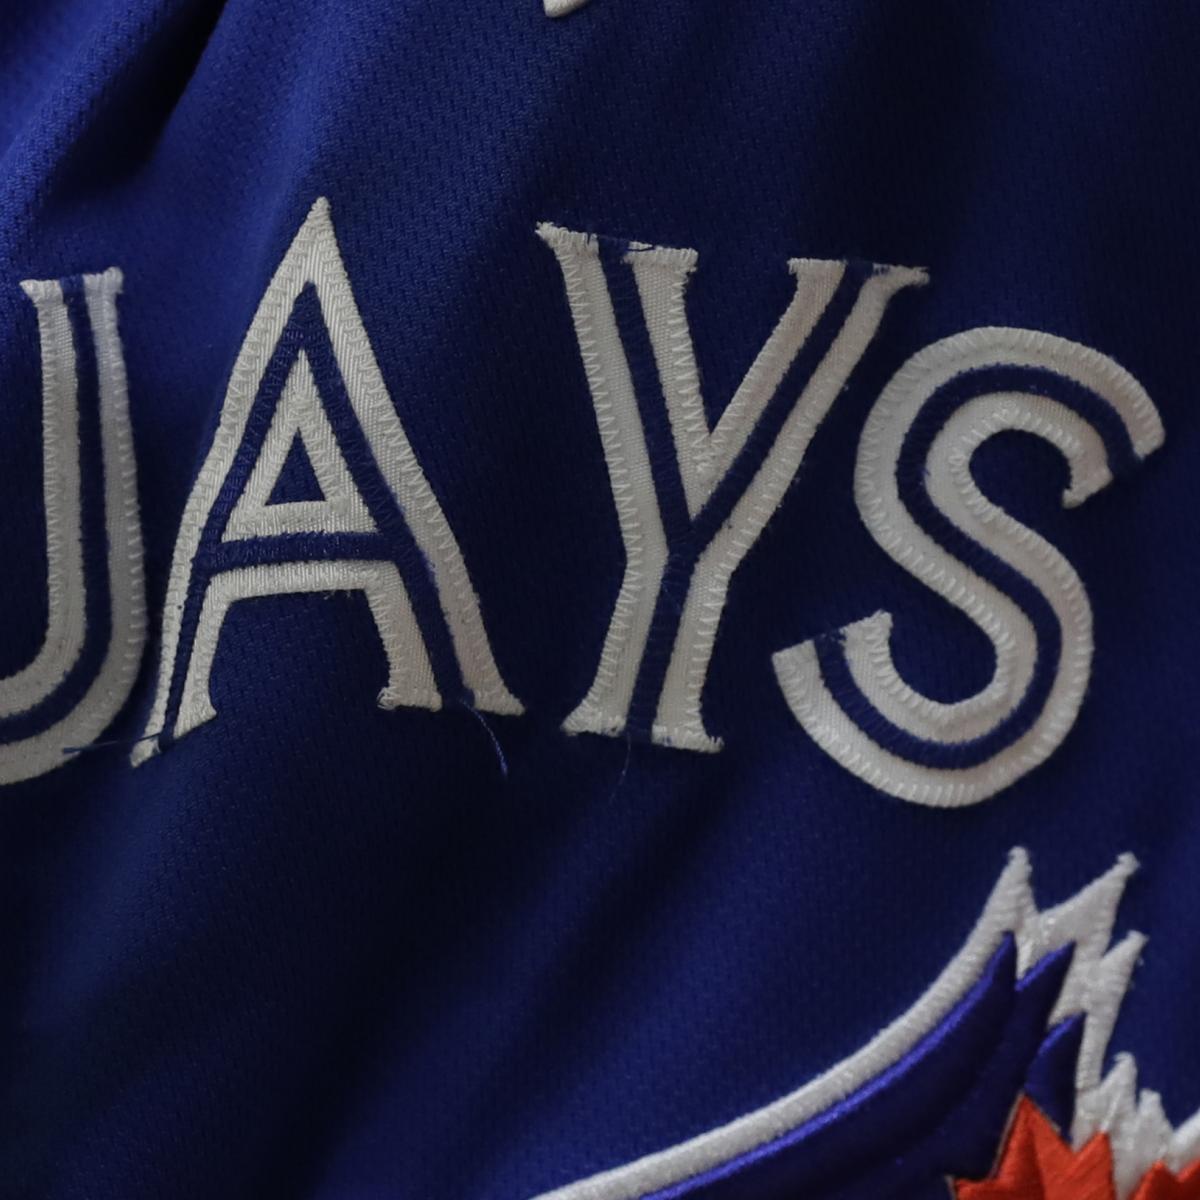 Toronto Blue Jays Apologize For Offensive 'Homeless Jays' T-Shirts - Narcity